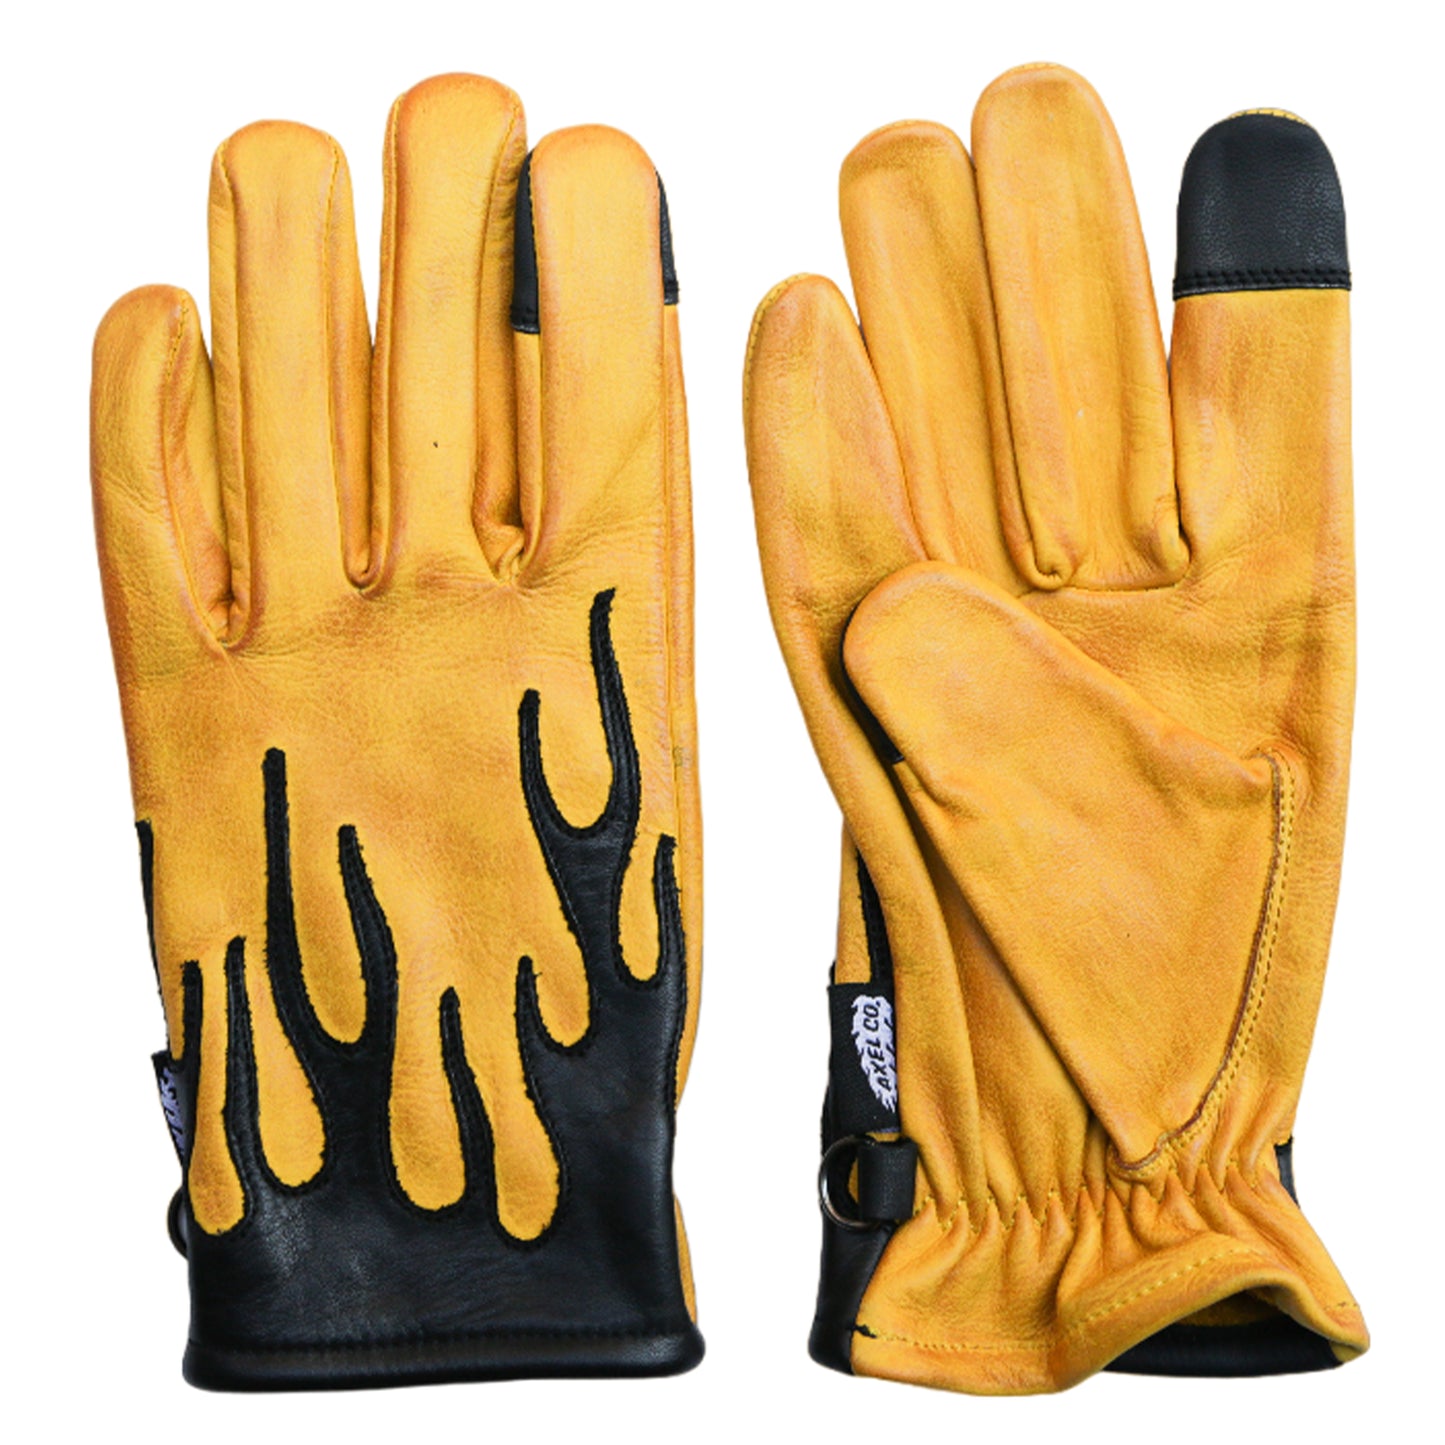 BLACK FLAME YELLOW GLOVES